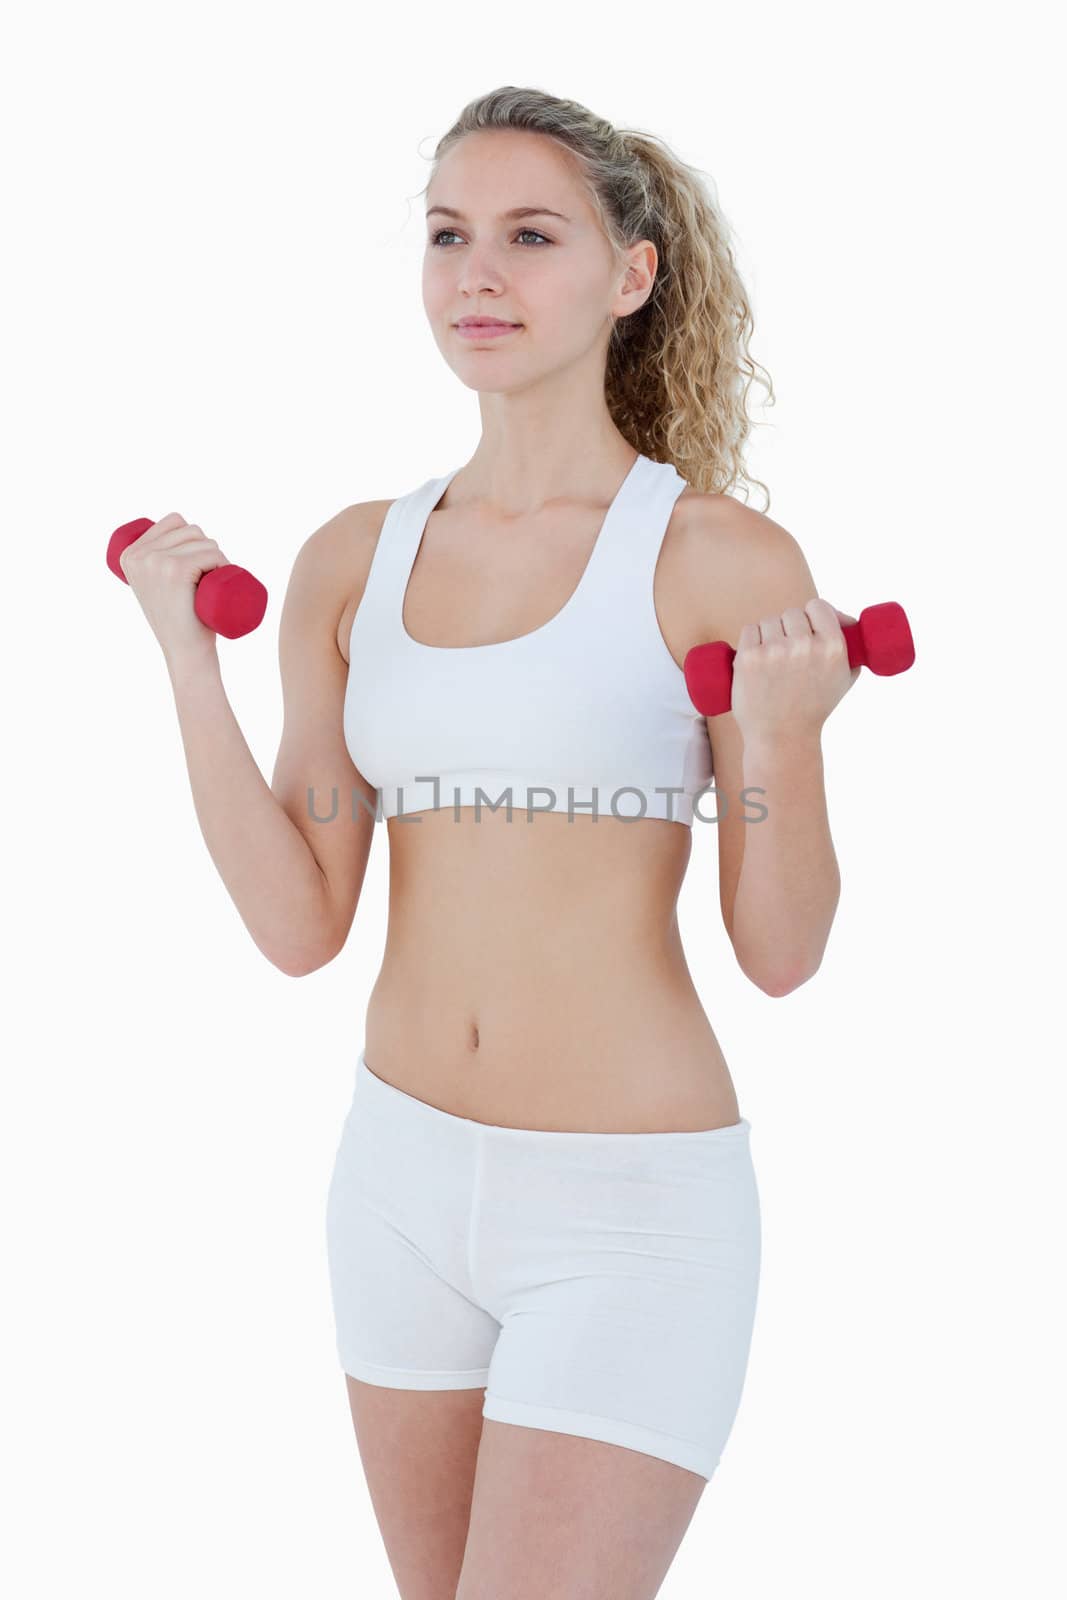 Concentrated teenager lifting red weights against a white background